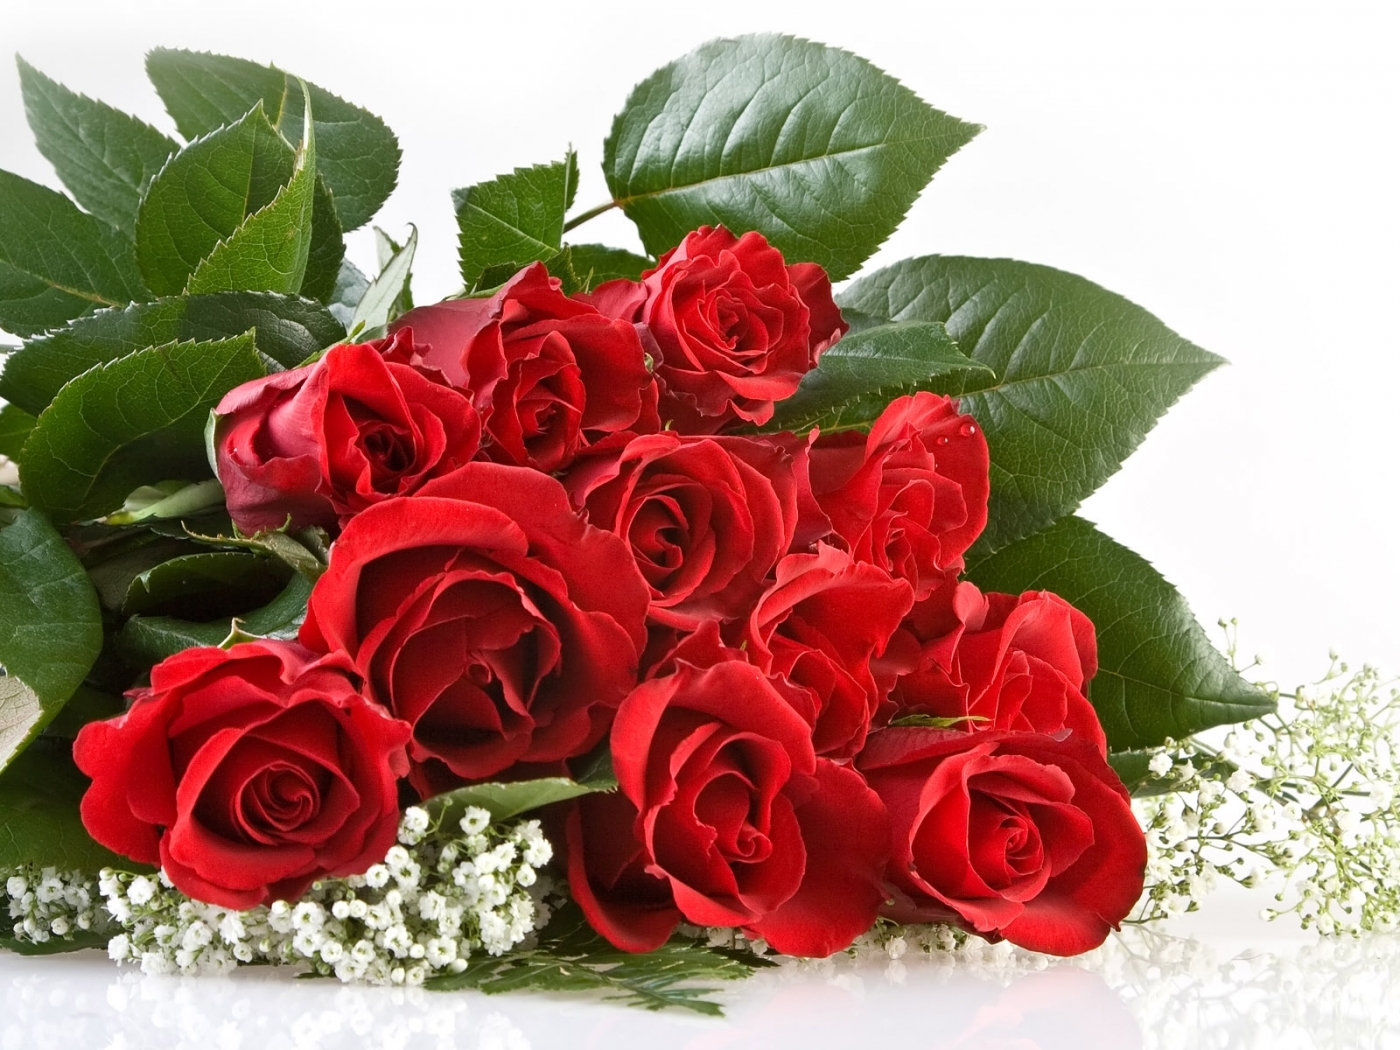 bouquets, roses, plants, flowers, red